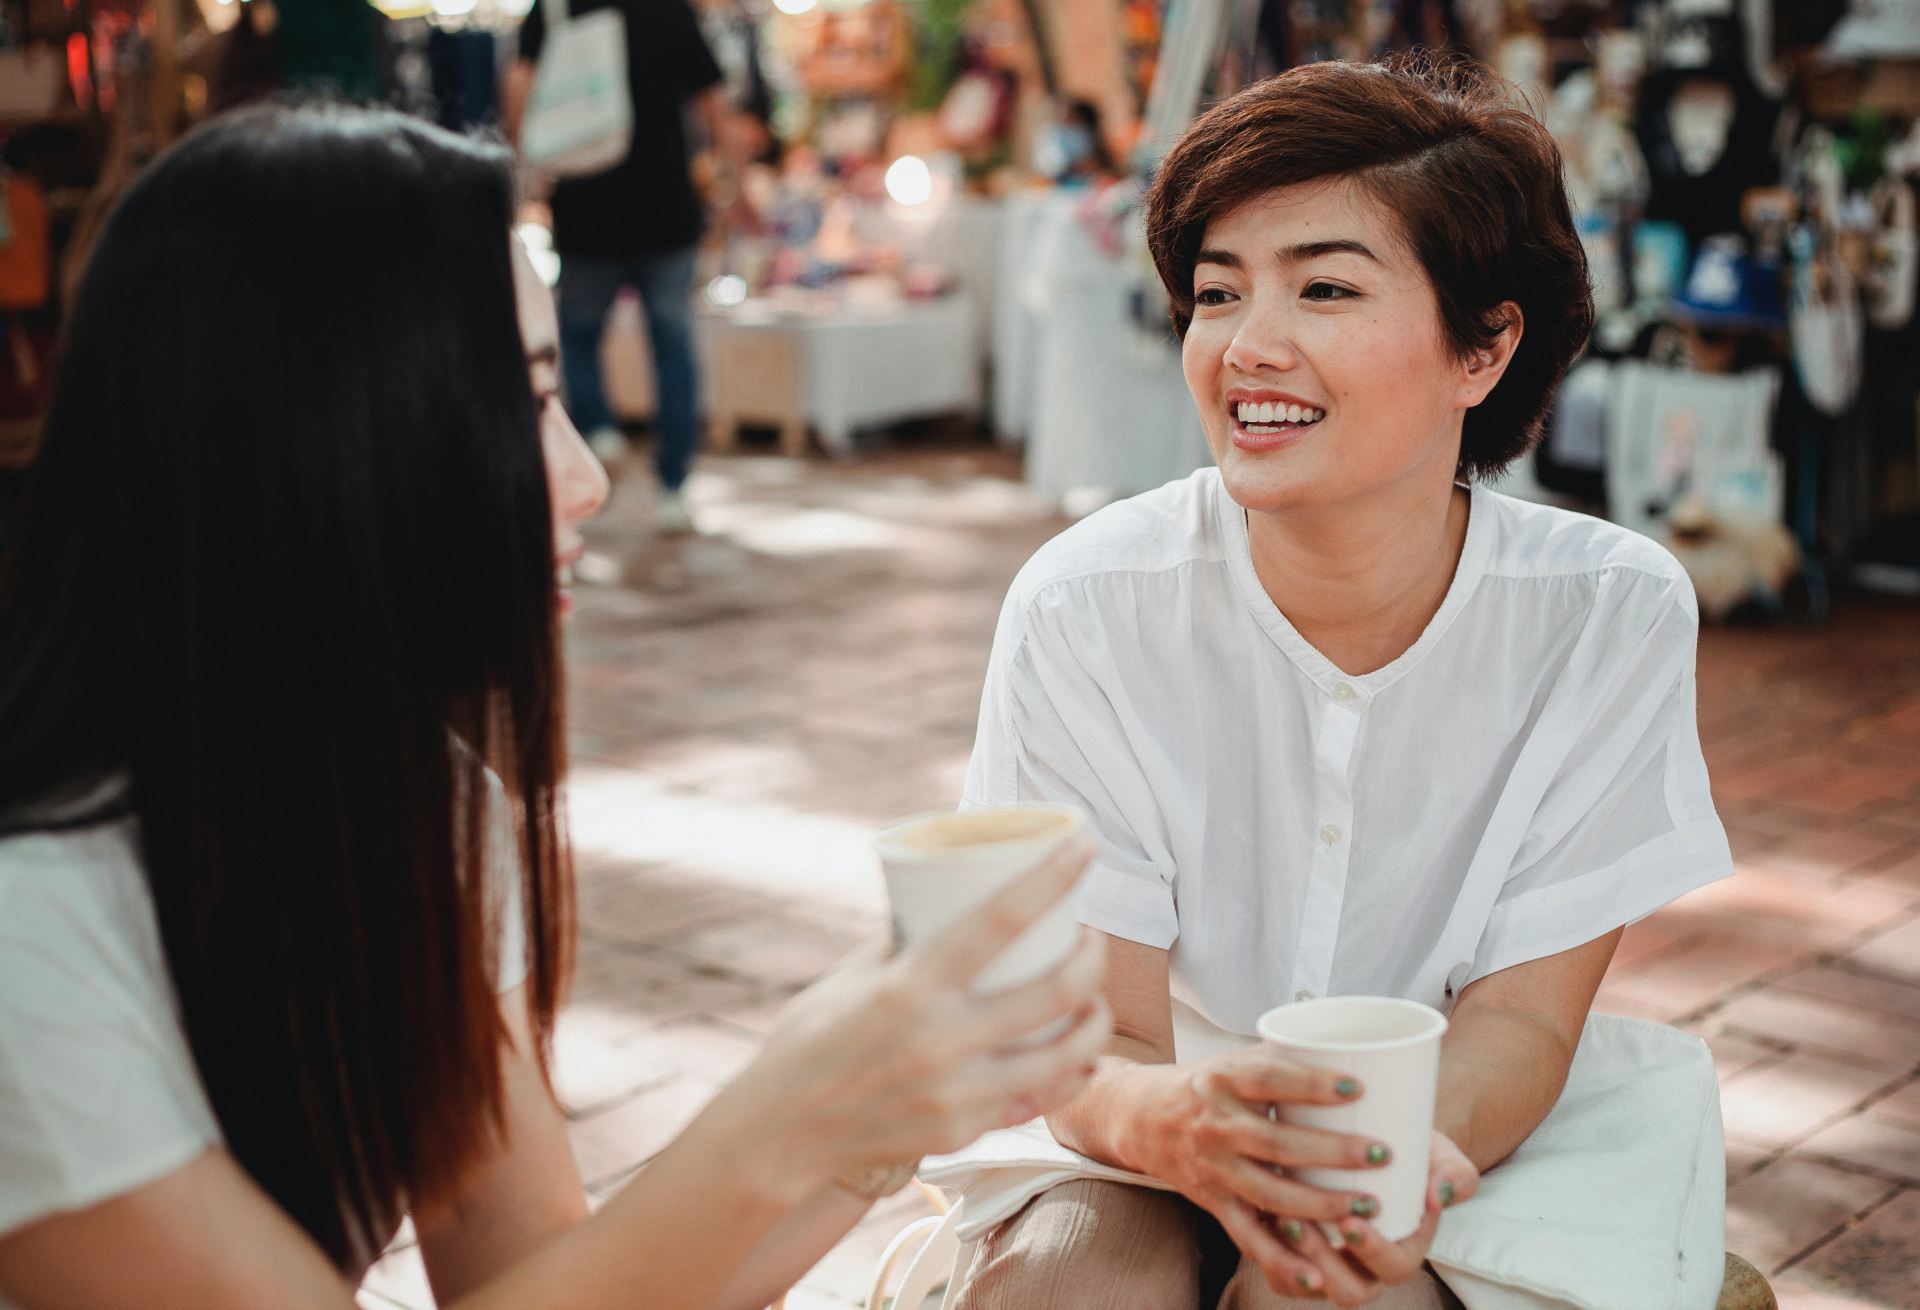 2 women sat down holding paper cups and smiling in a busy street. 